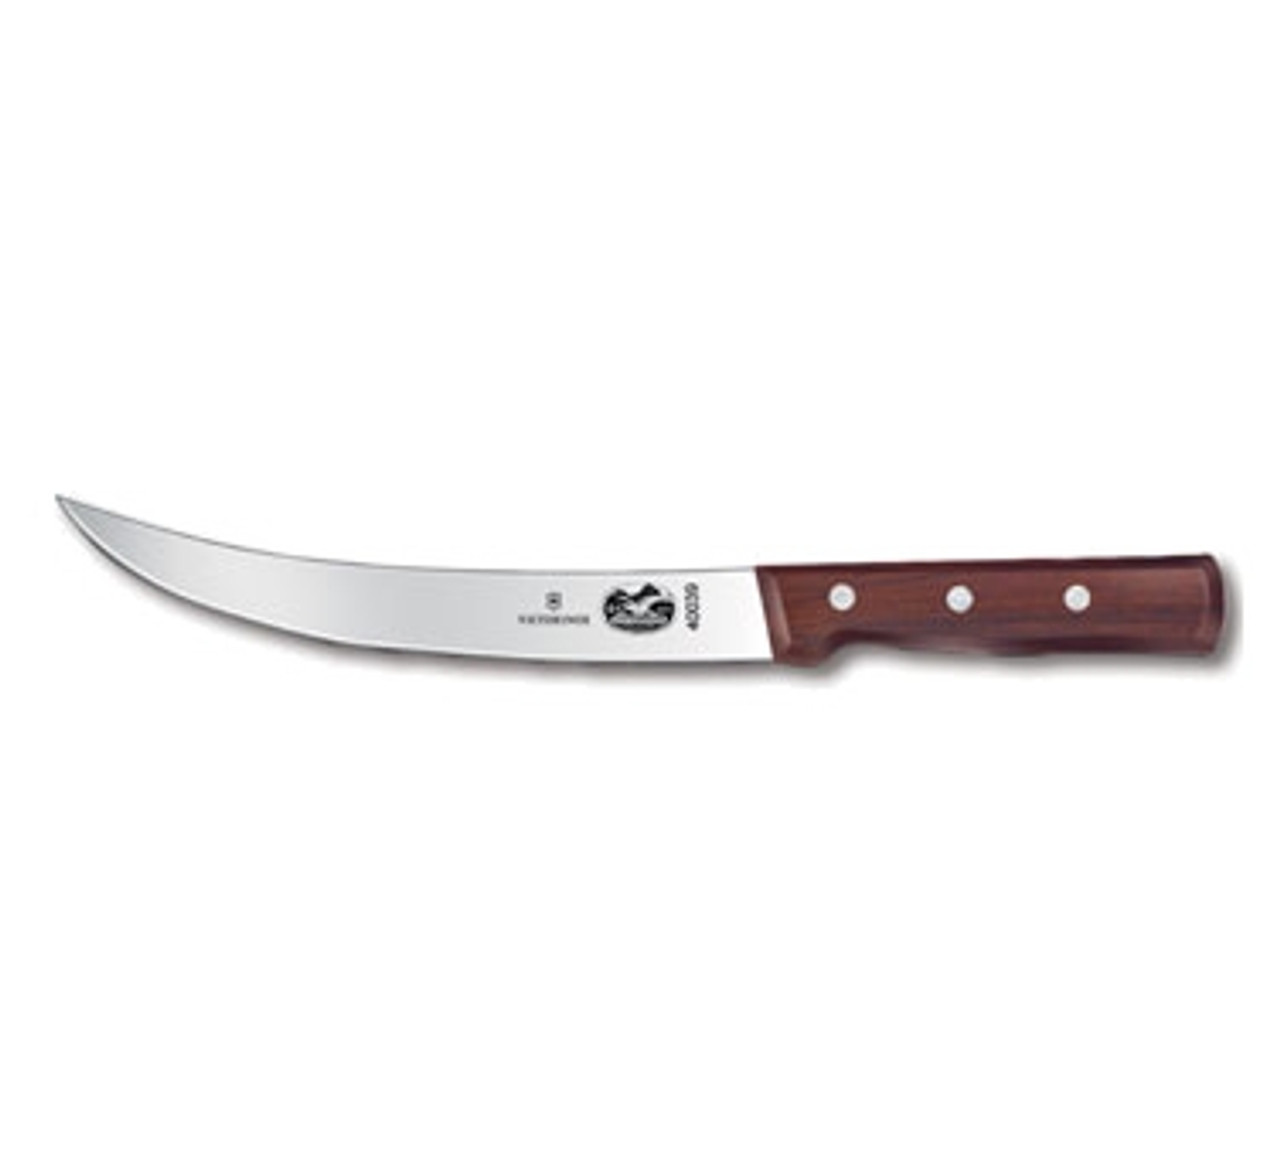 Victorinox 5.7200.20 8" Curved Breaking Knife with Rosewood Handle